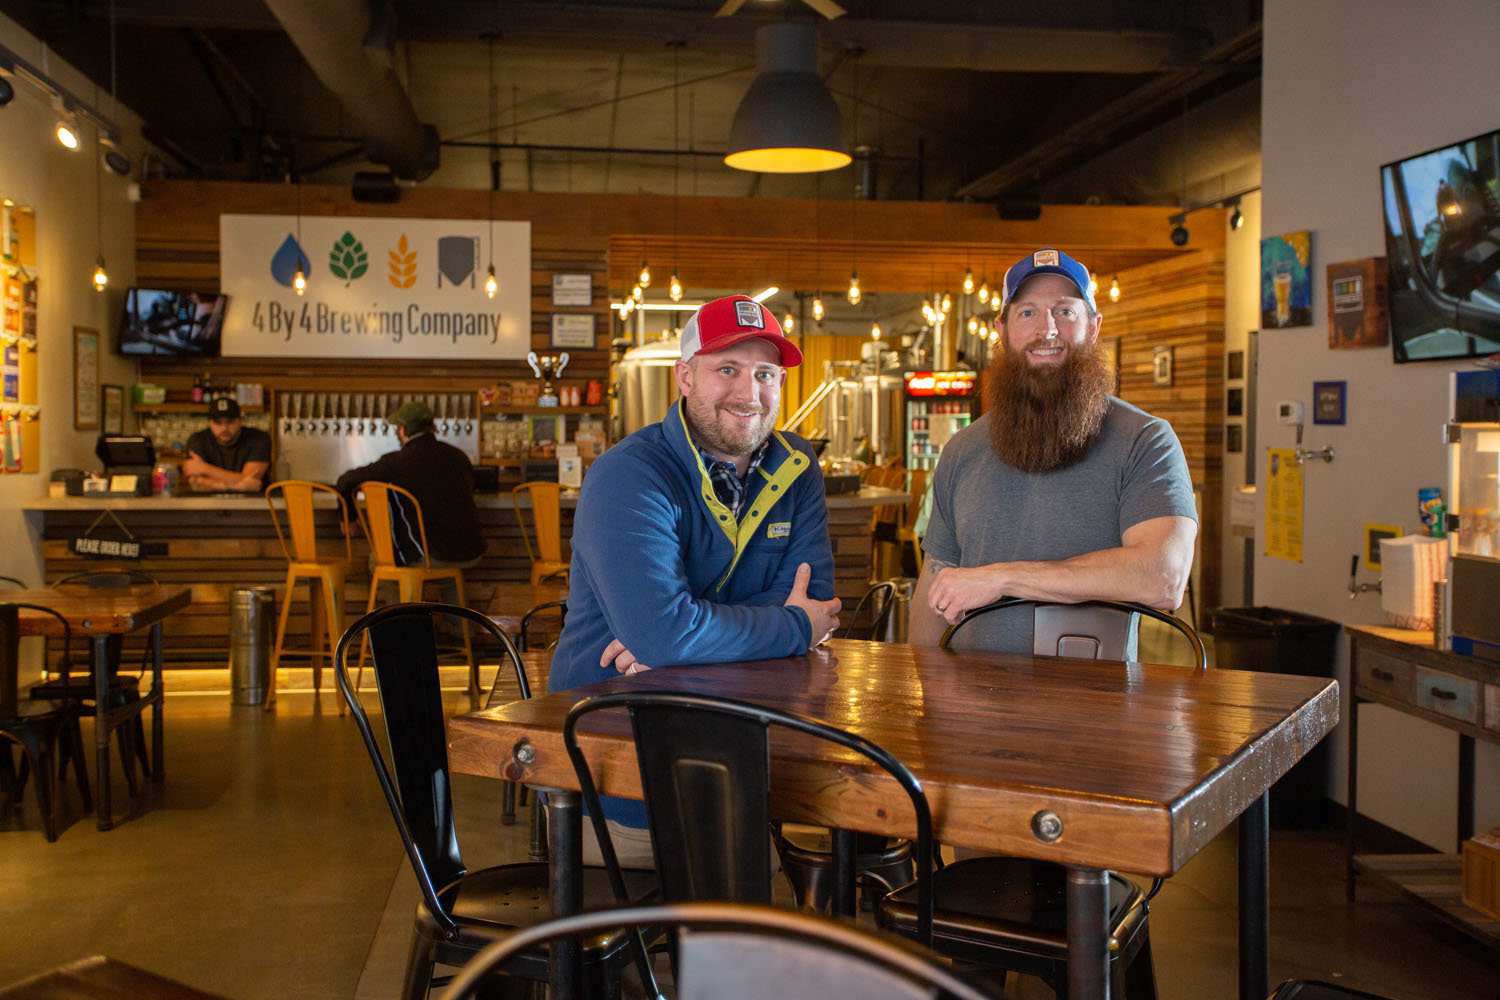 BREWING BUSINESS: Derek Shimeall, left, Chris Shaffer and the 4 By 4 Brewing Co. ownership group led the microbrewery to $800,000 in revenue last year.